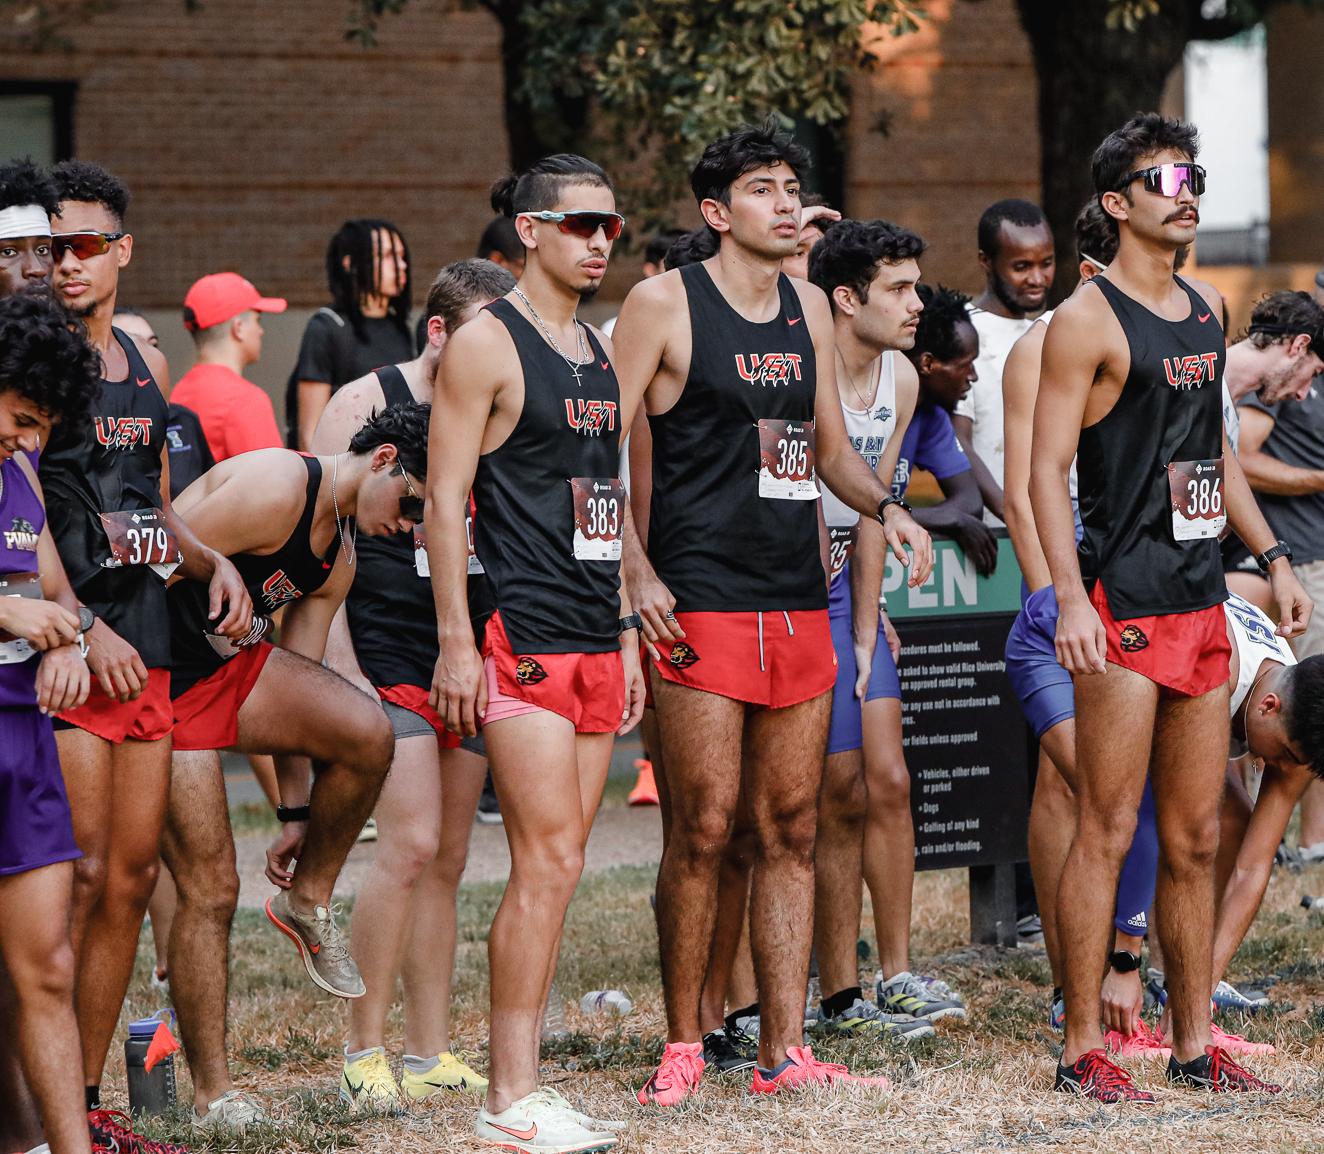 Men's Cross Country Ready for SCAC Meet